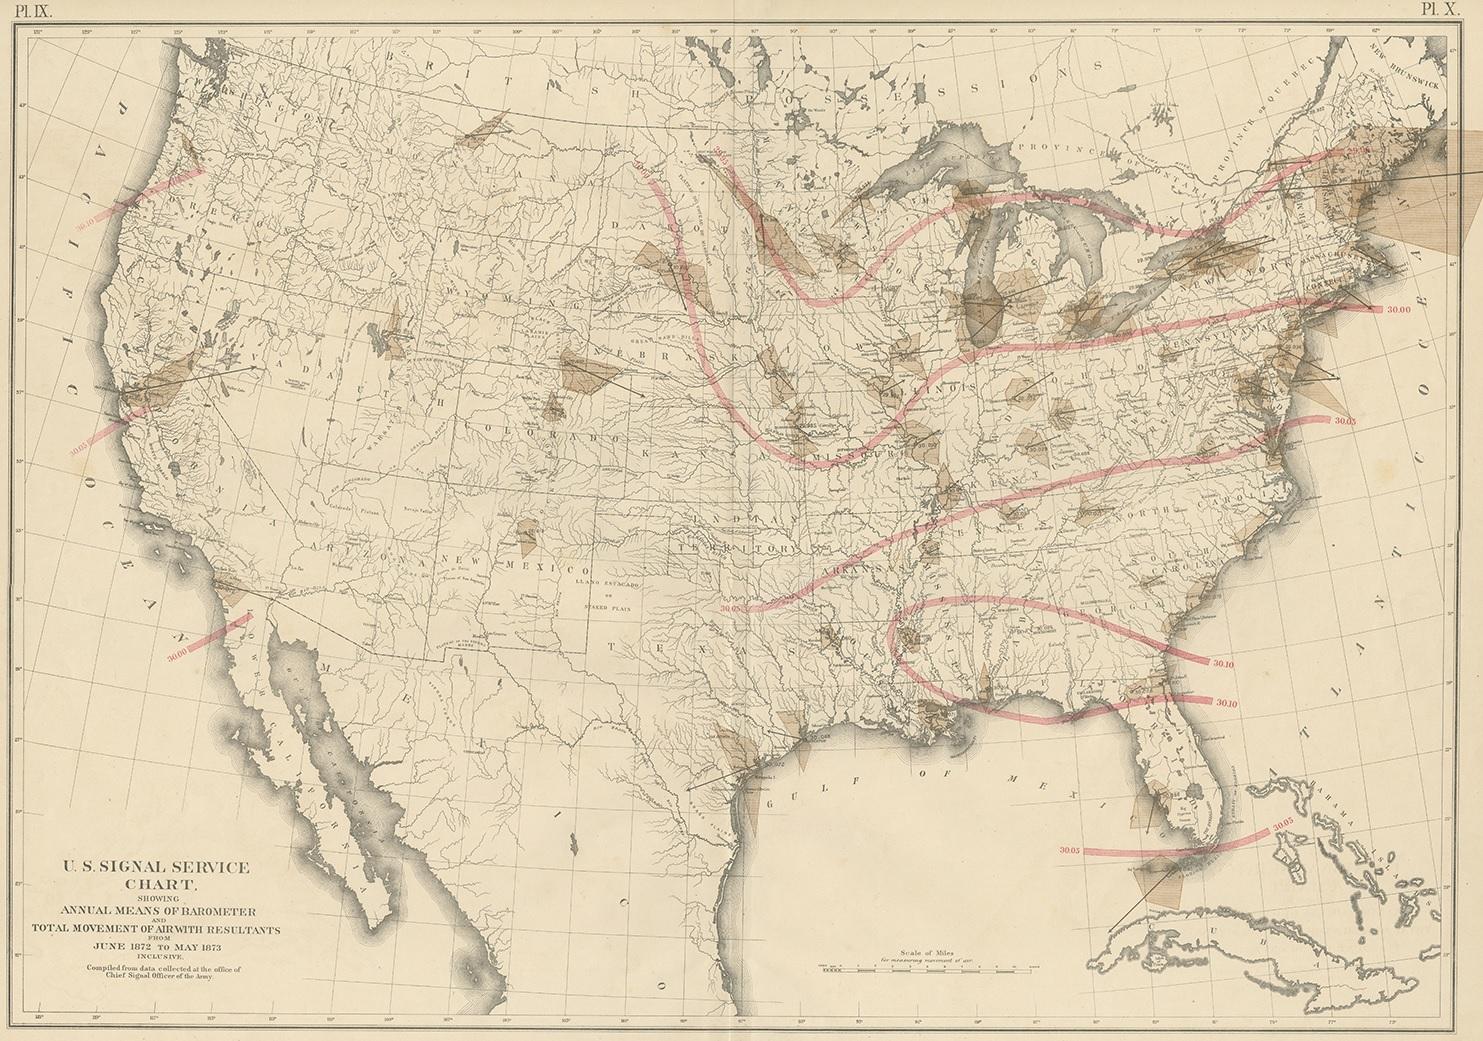 Antique map titled 'U.S. Signal Service chart, showing annual means of barometer and total movement of air with resultants from June 1872 to May 1873 inclusive. Compiled from data collected at the Office of the Chief Signal Officer of the Army'.